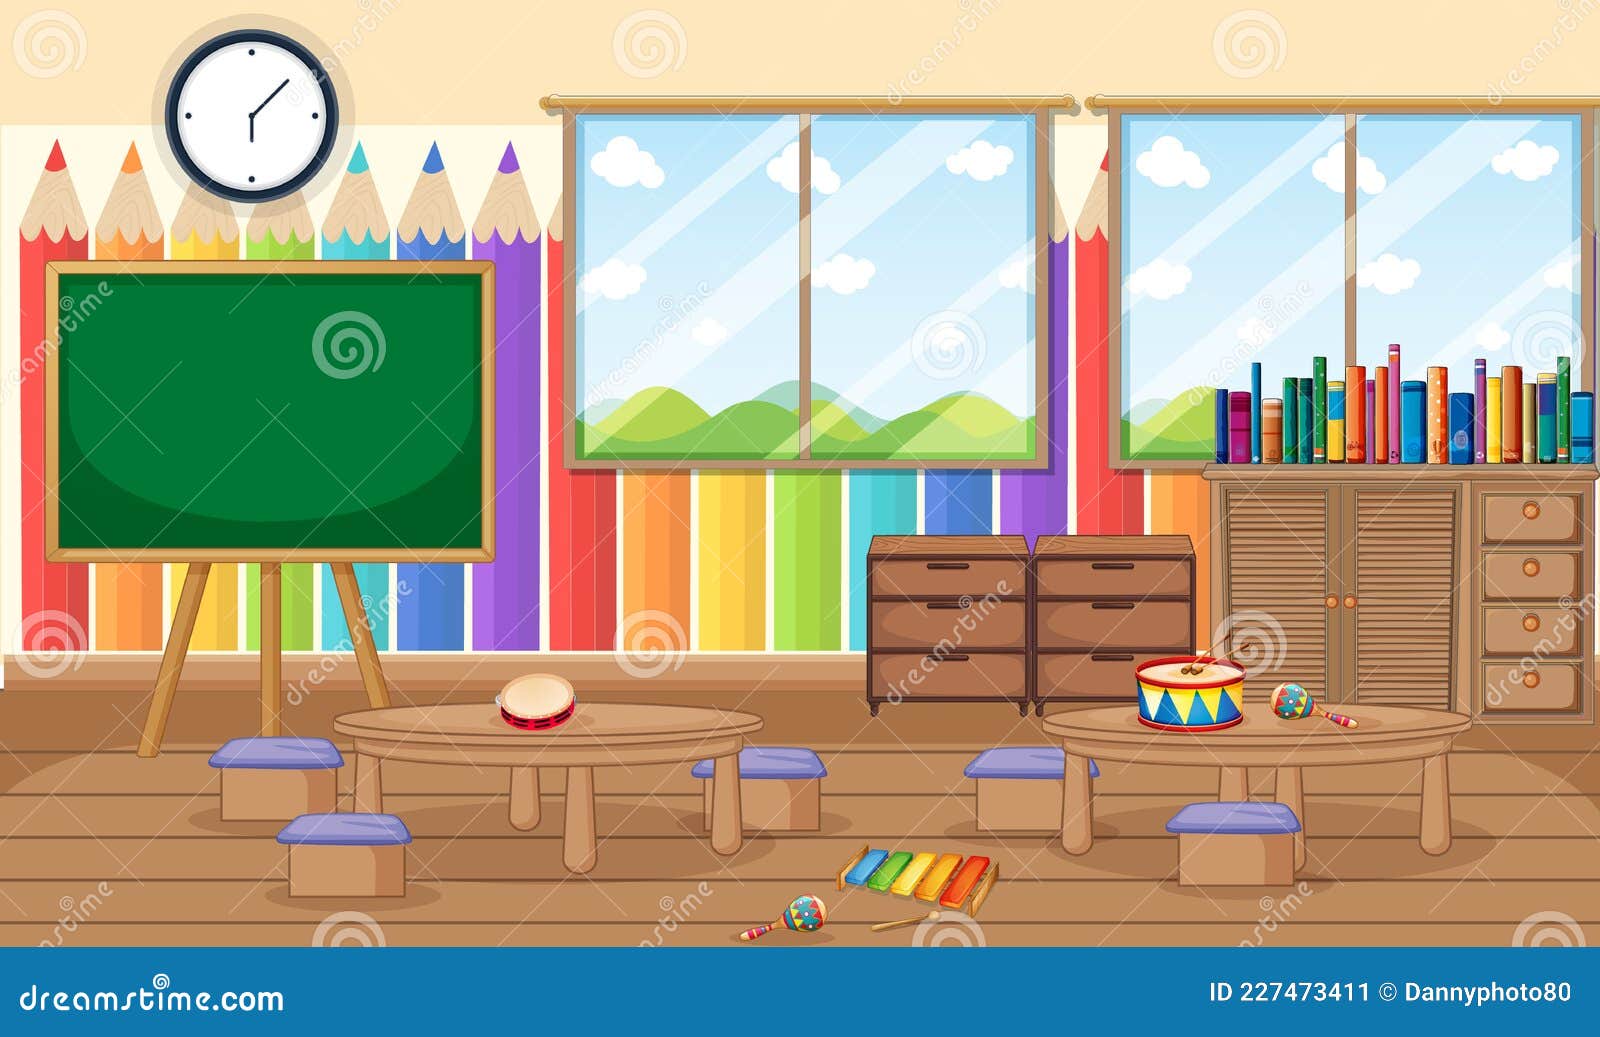 Empty Kindergarten Room with Classroom Objects and Interior ...